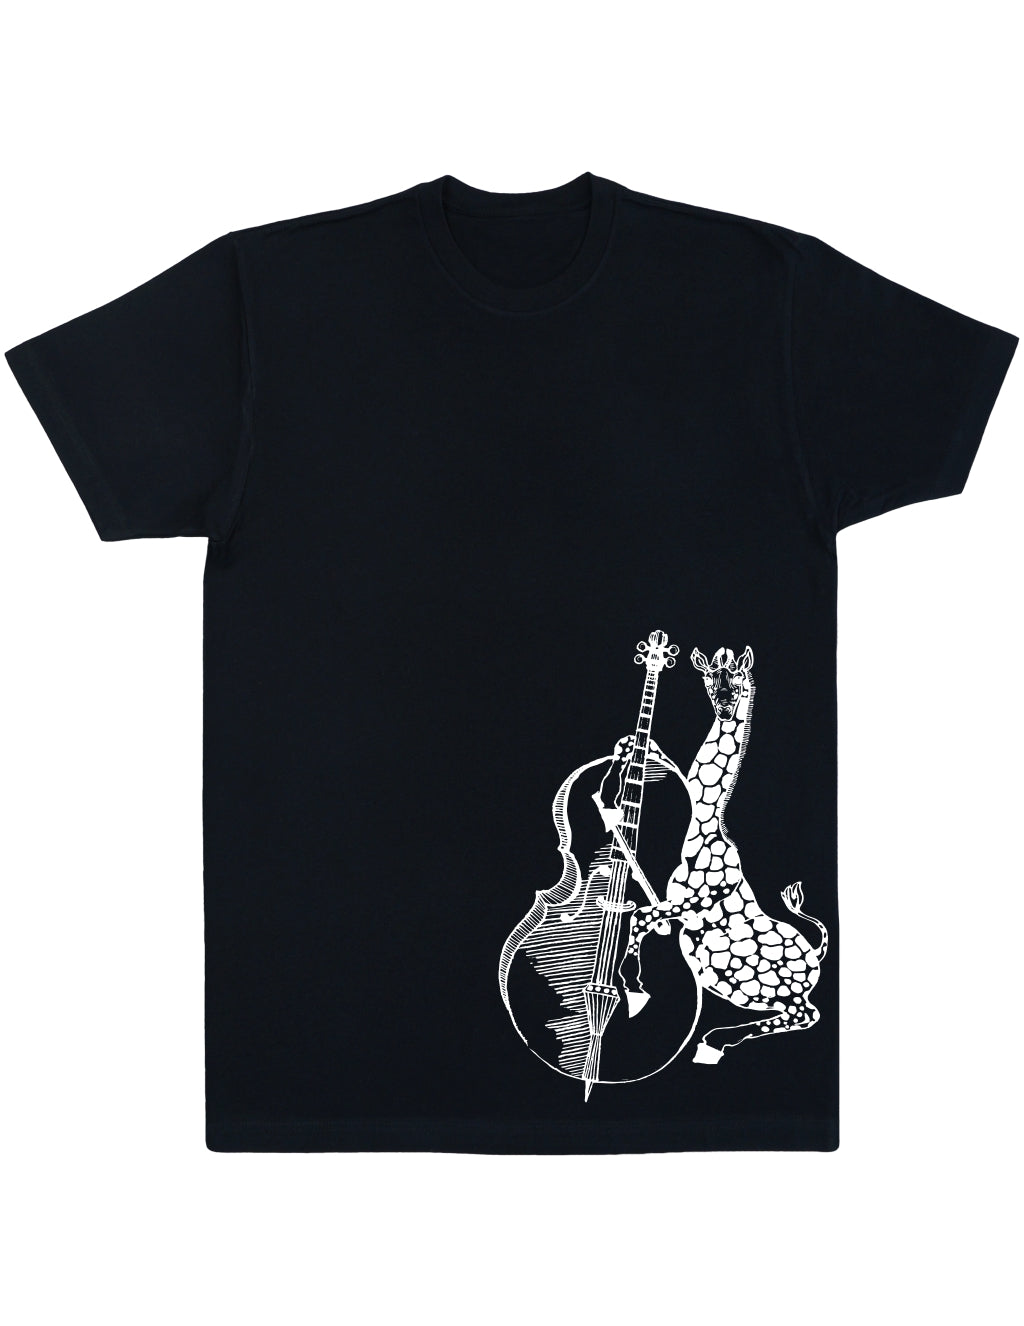 seembo-black-t-shirt-with-giraffe-playing-cello-cellist-art-on-it